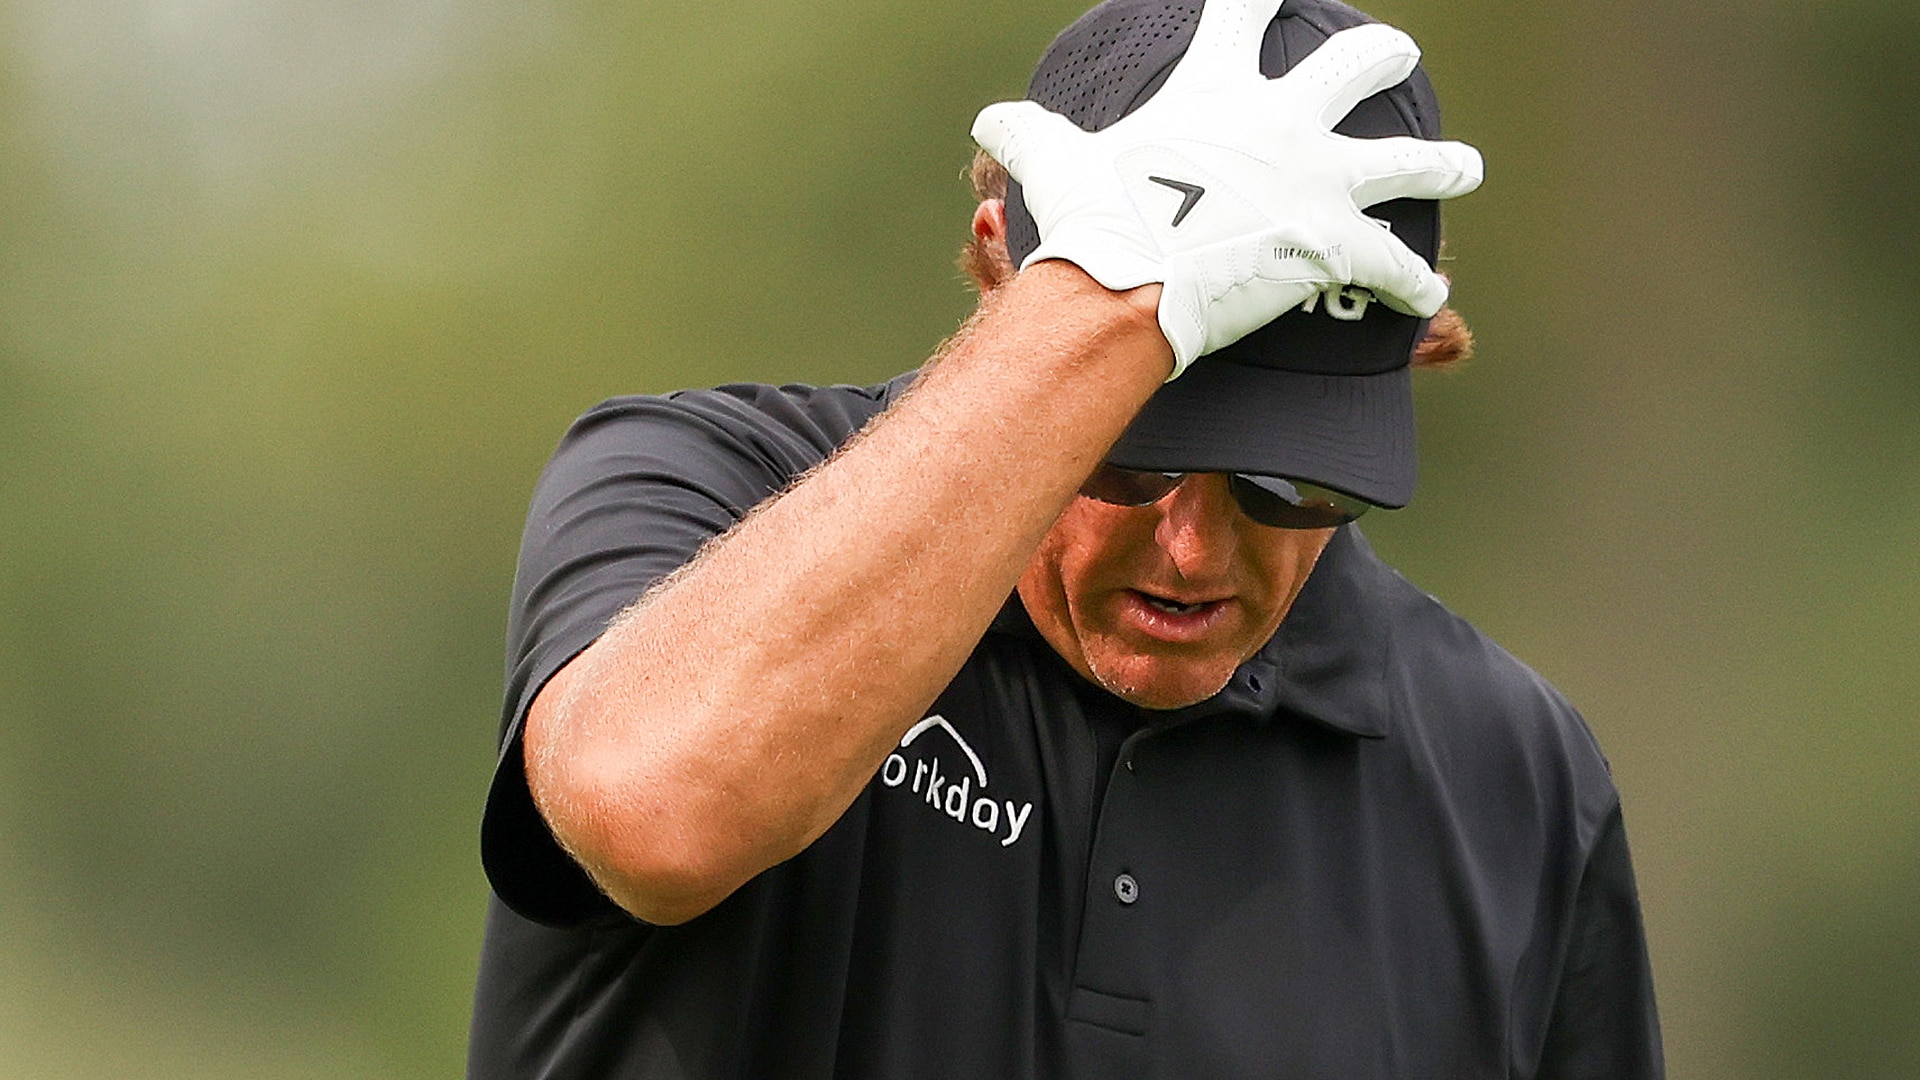 Phil Mickelson Implodes with Opening 79 at U.S. Open: ‘I Just Played Terrible’